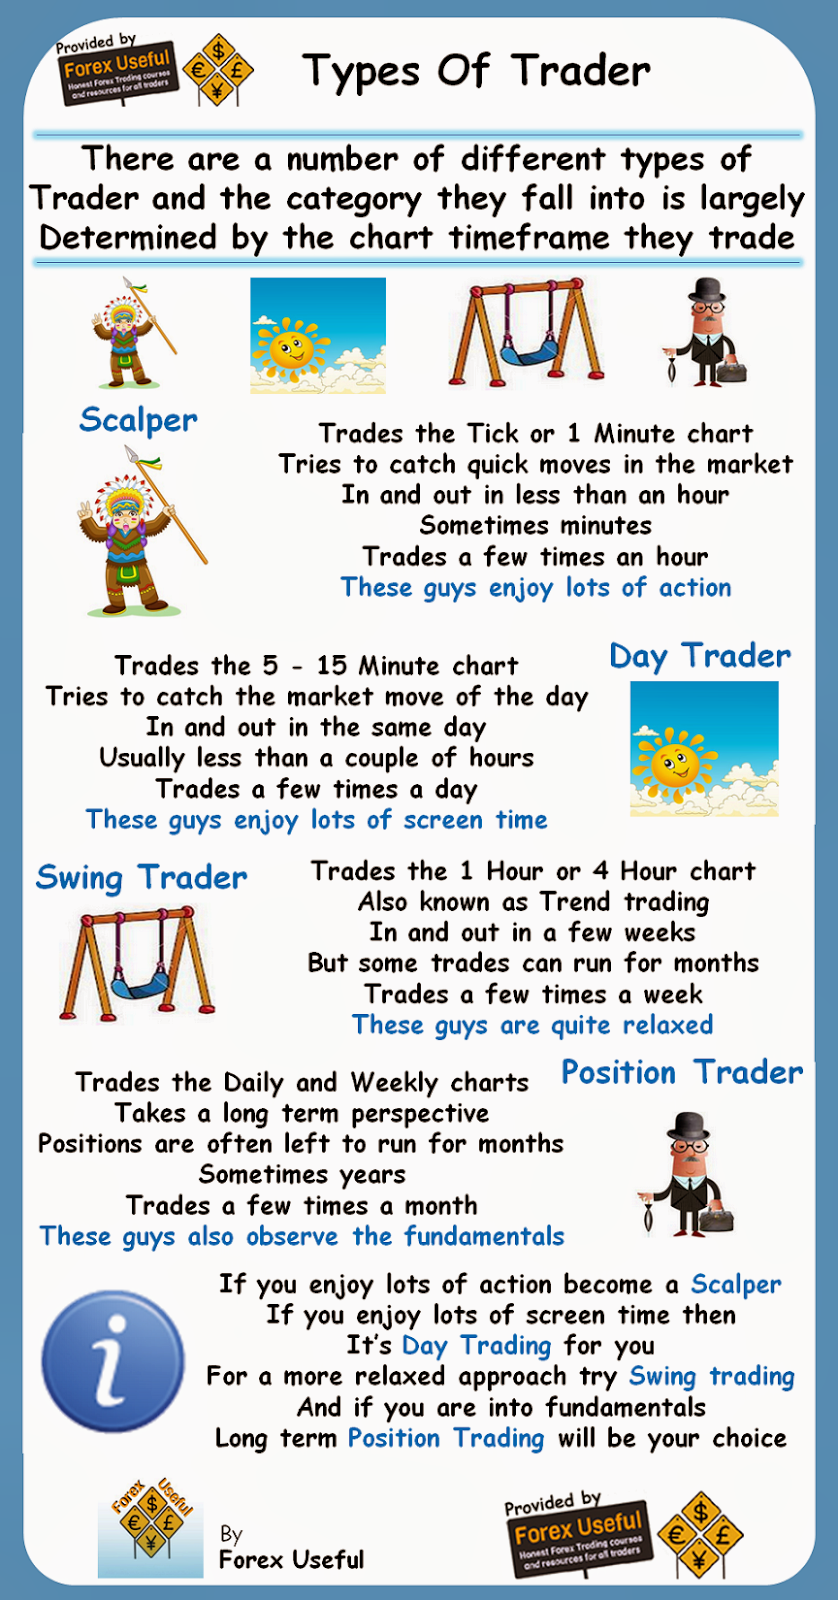 Types Of Trader Info-Graphic